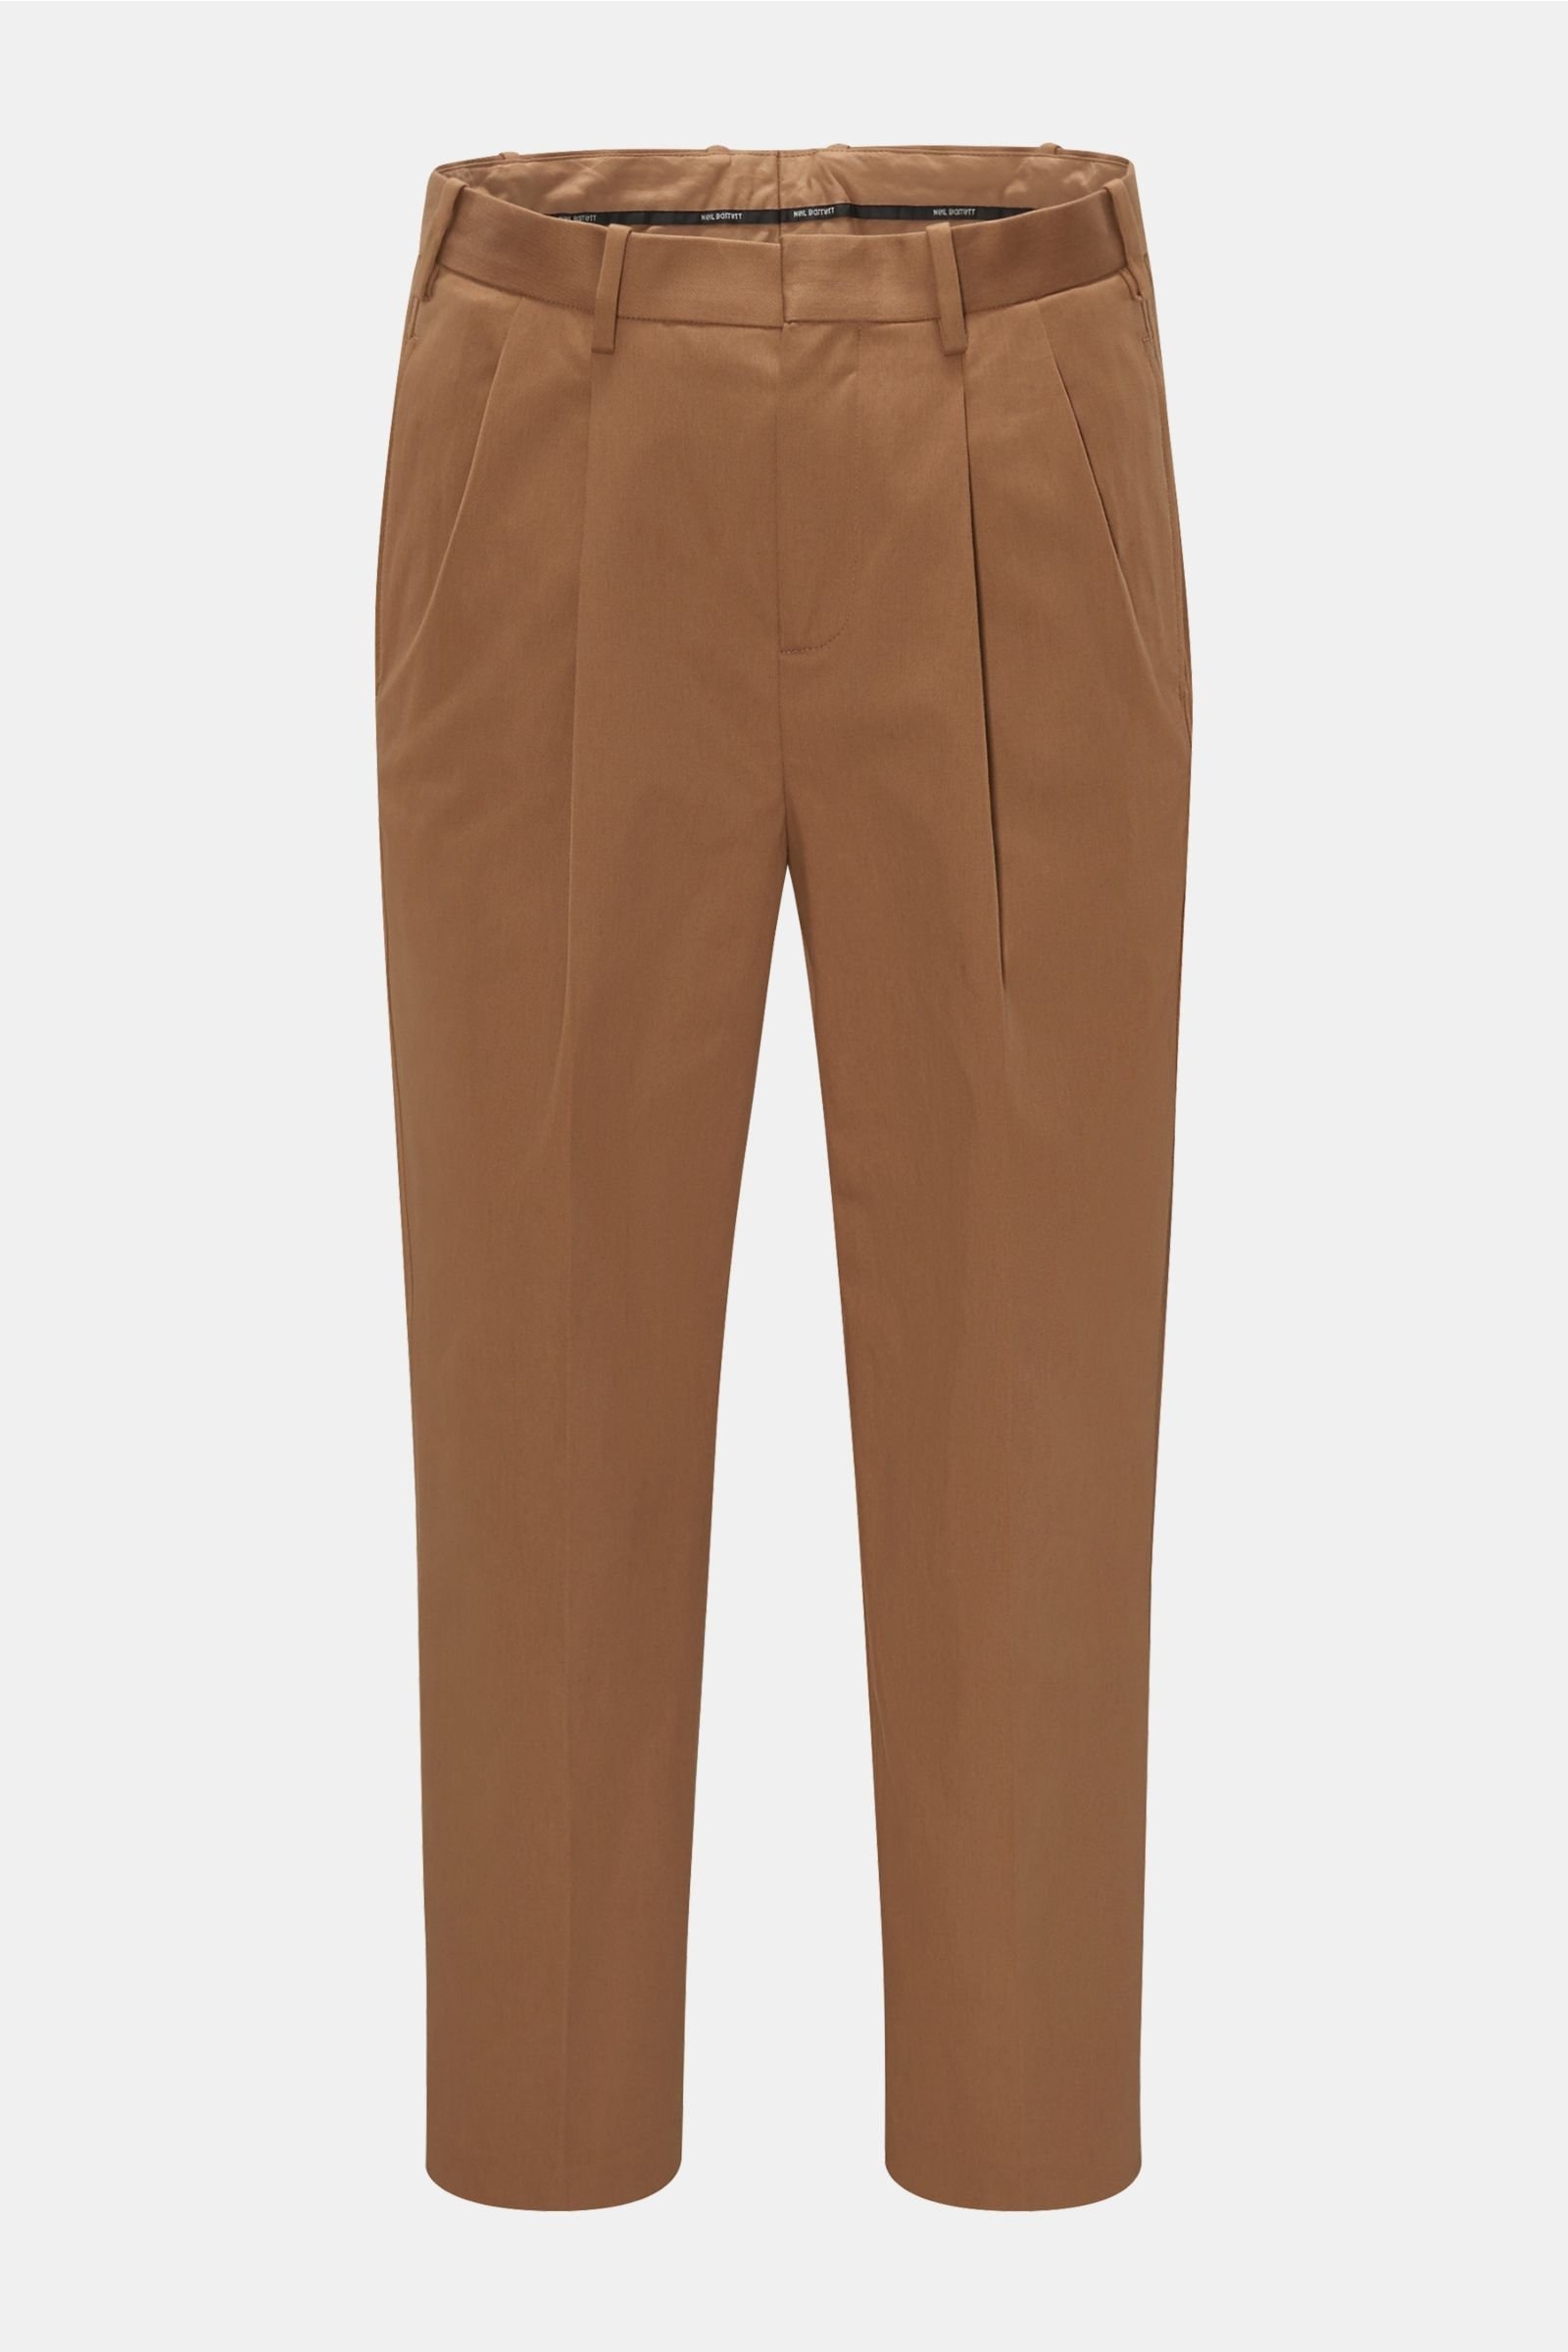 Cotton trousers brown